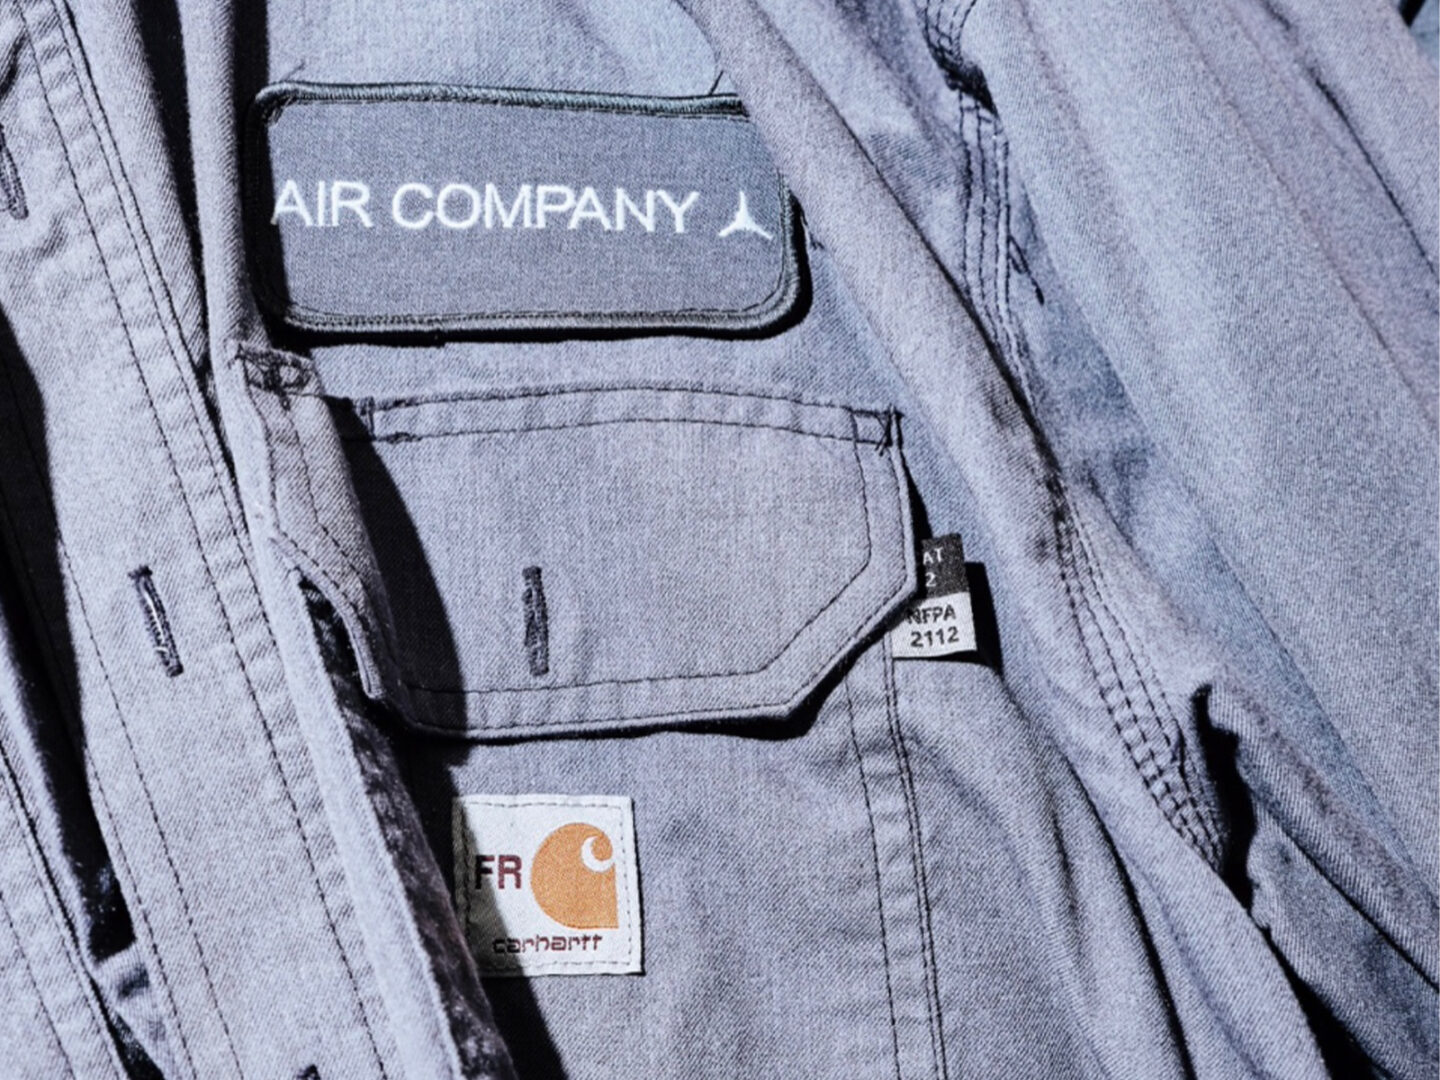 AIR COMPANY and Carhartt WIP are up to something